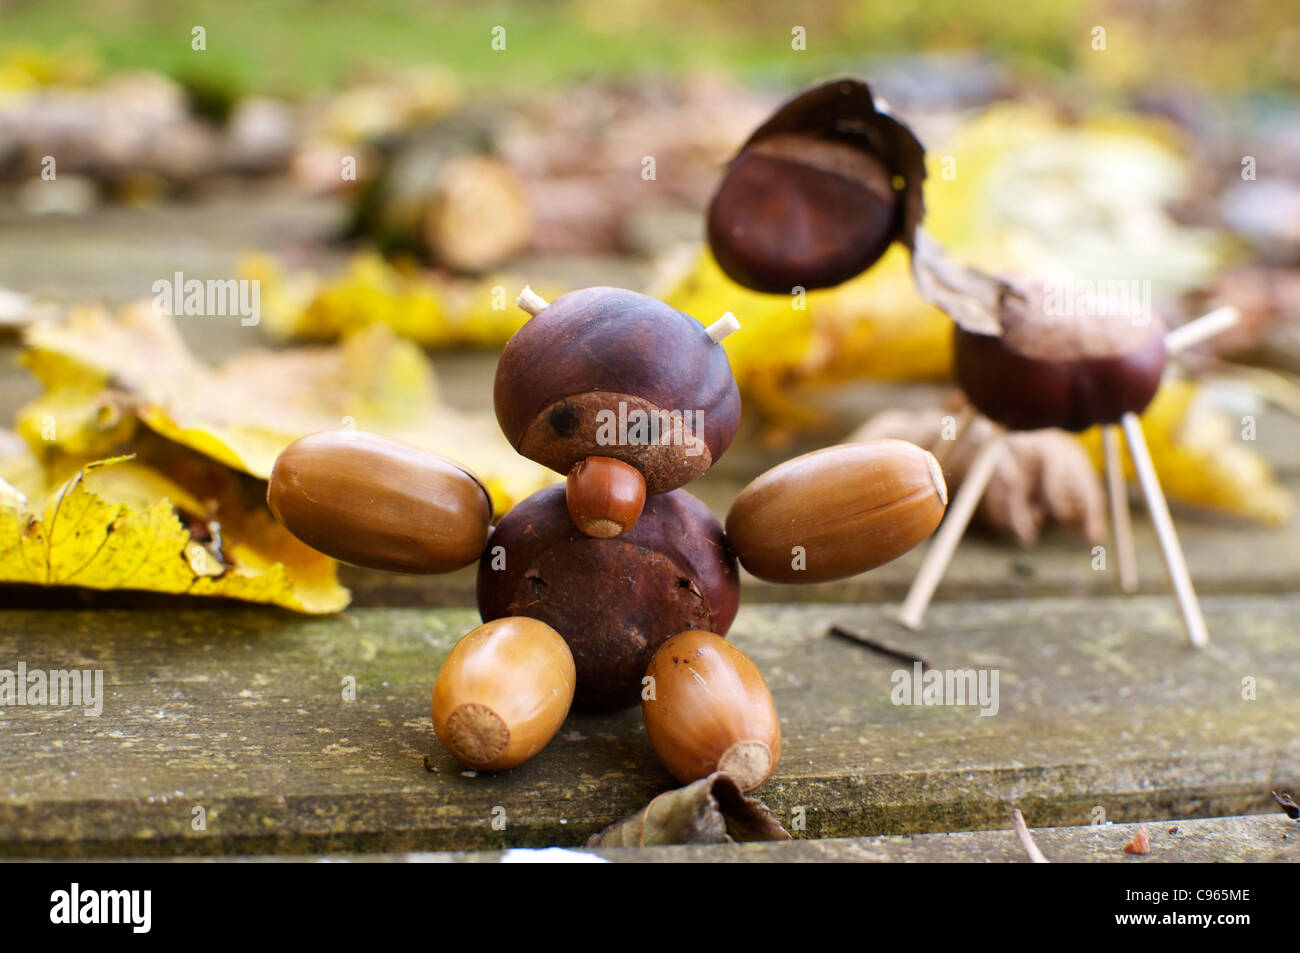 Chestnut Figurine High Resolution Stock Photography and Images - Alamy